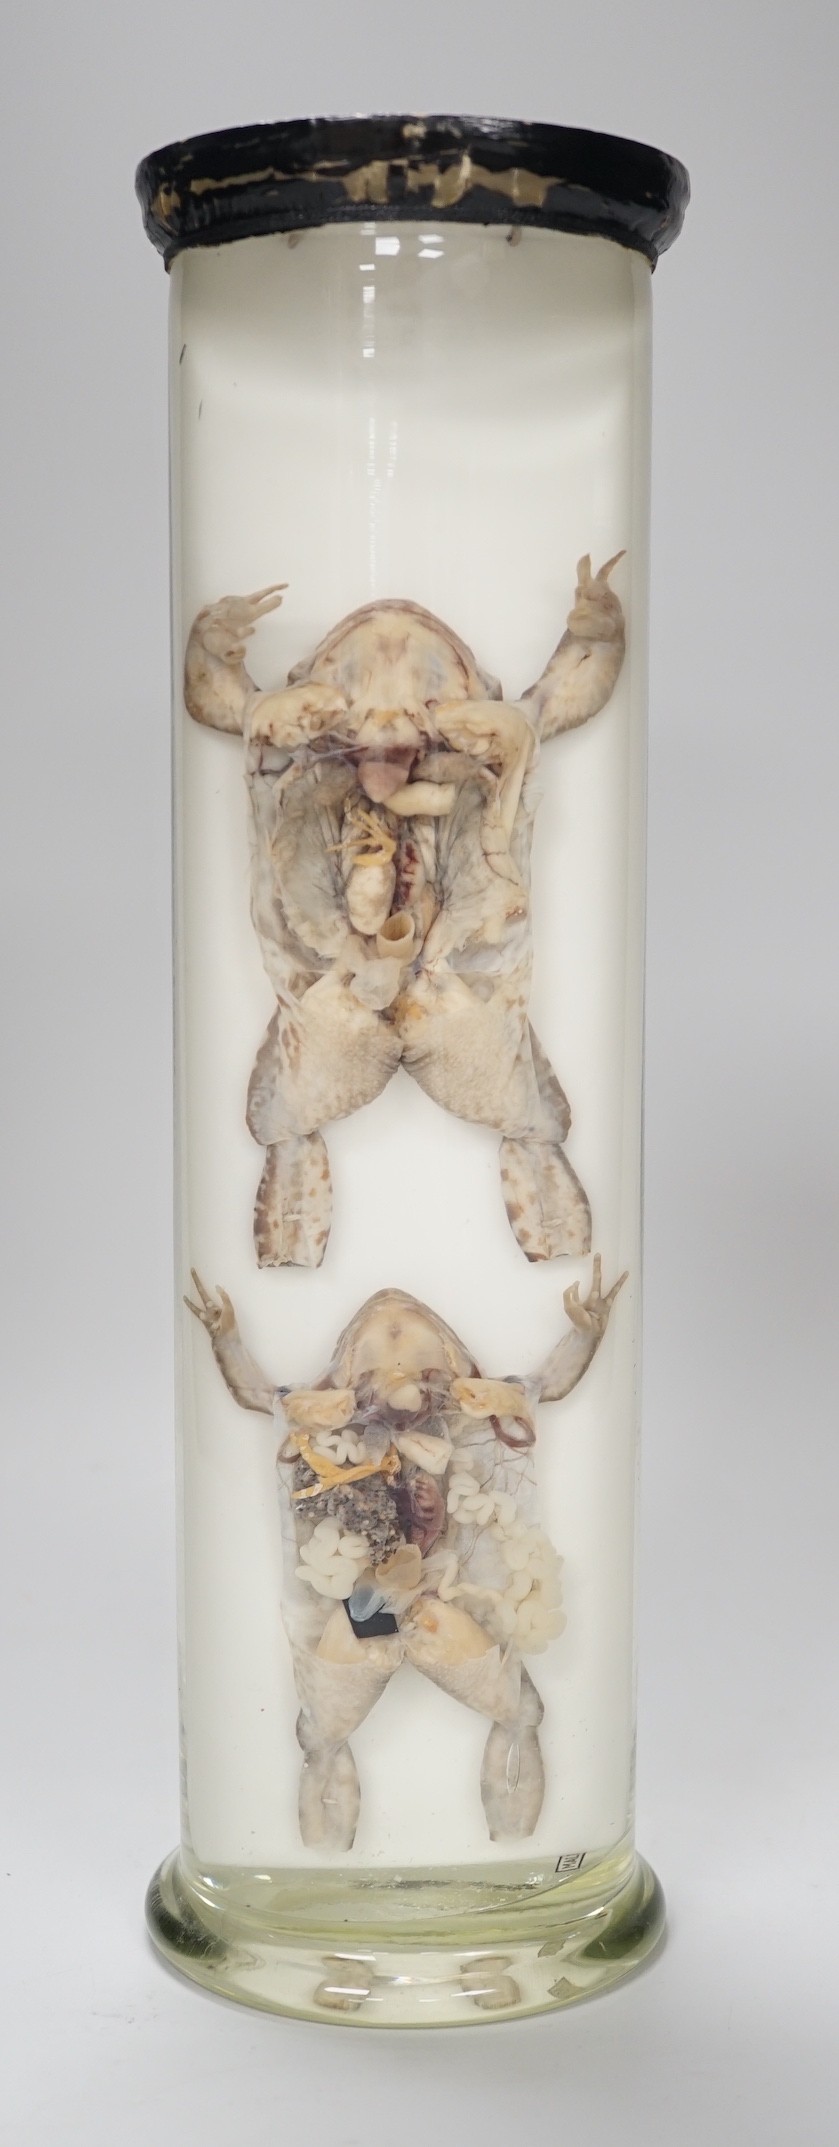 A biological specimen - Rana Temporaria (Common frog) reproductive systems, male and female forms, prepared by Flatters and Garnett, Manchester, circa 1920's/30's. 31cm high                                               